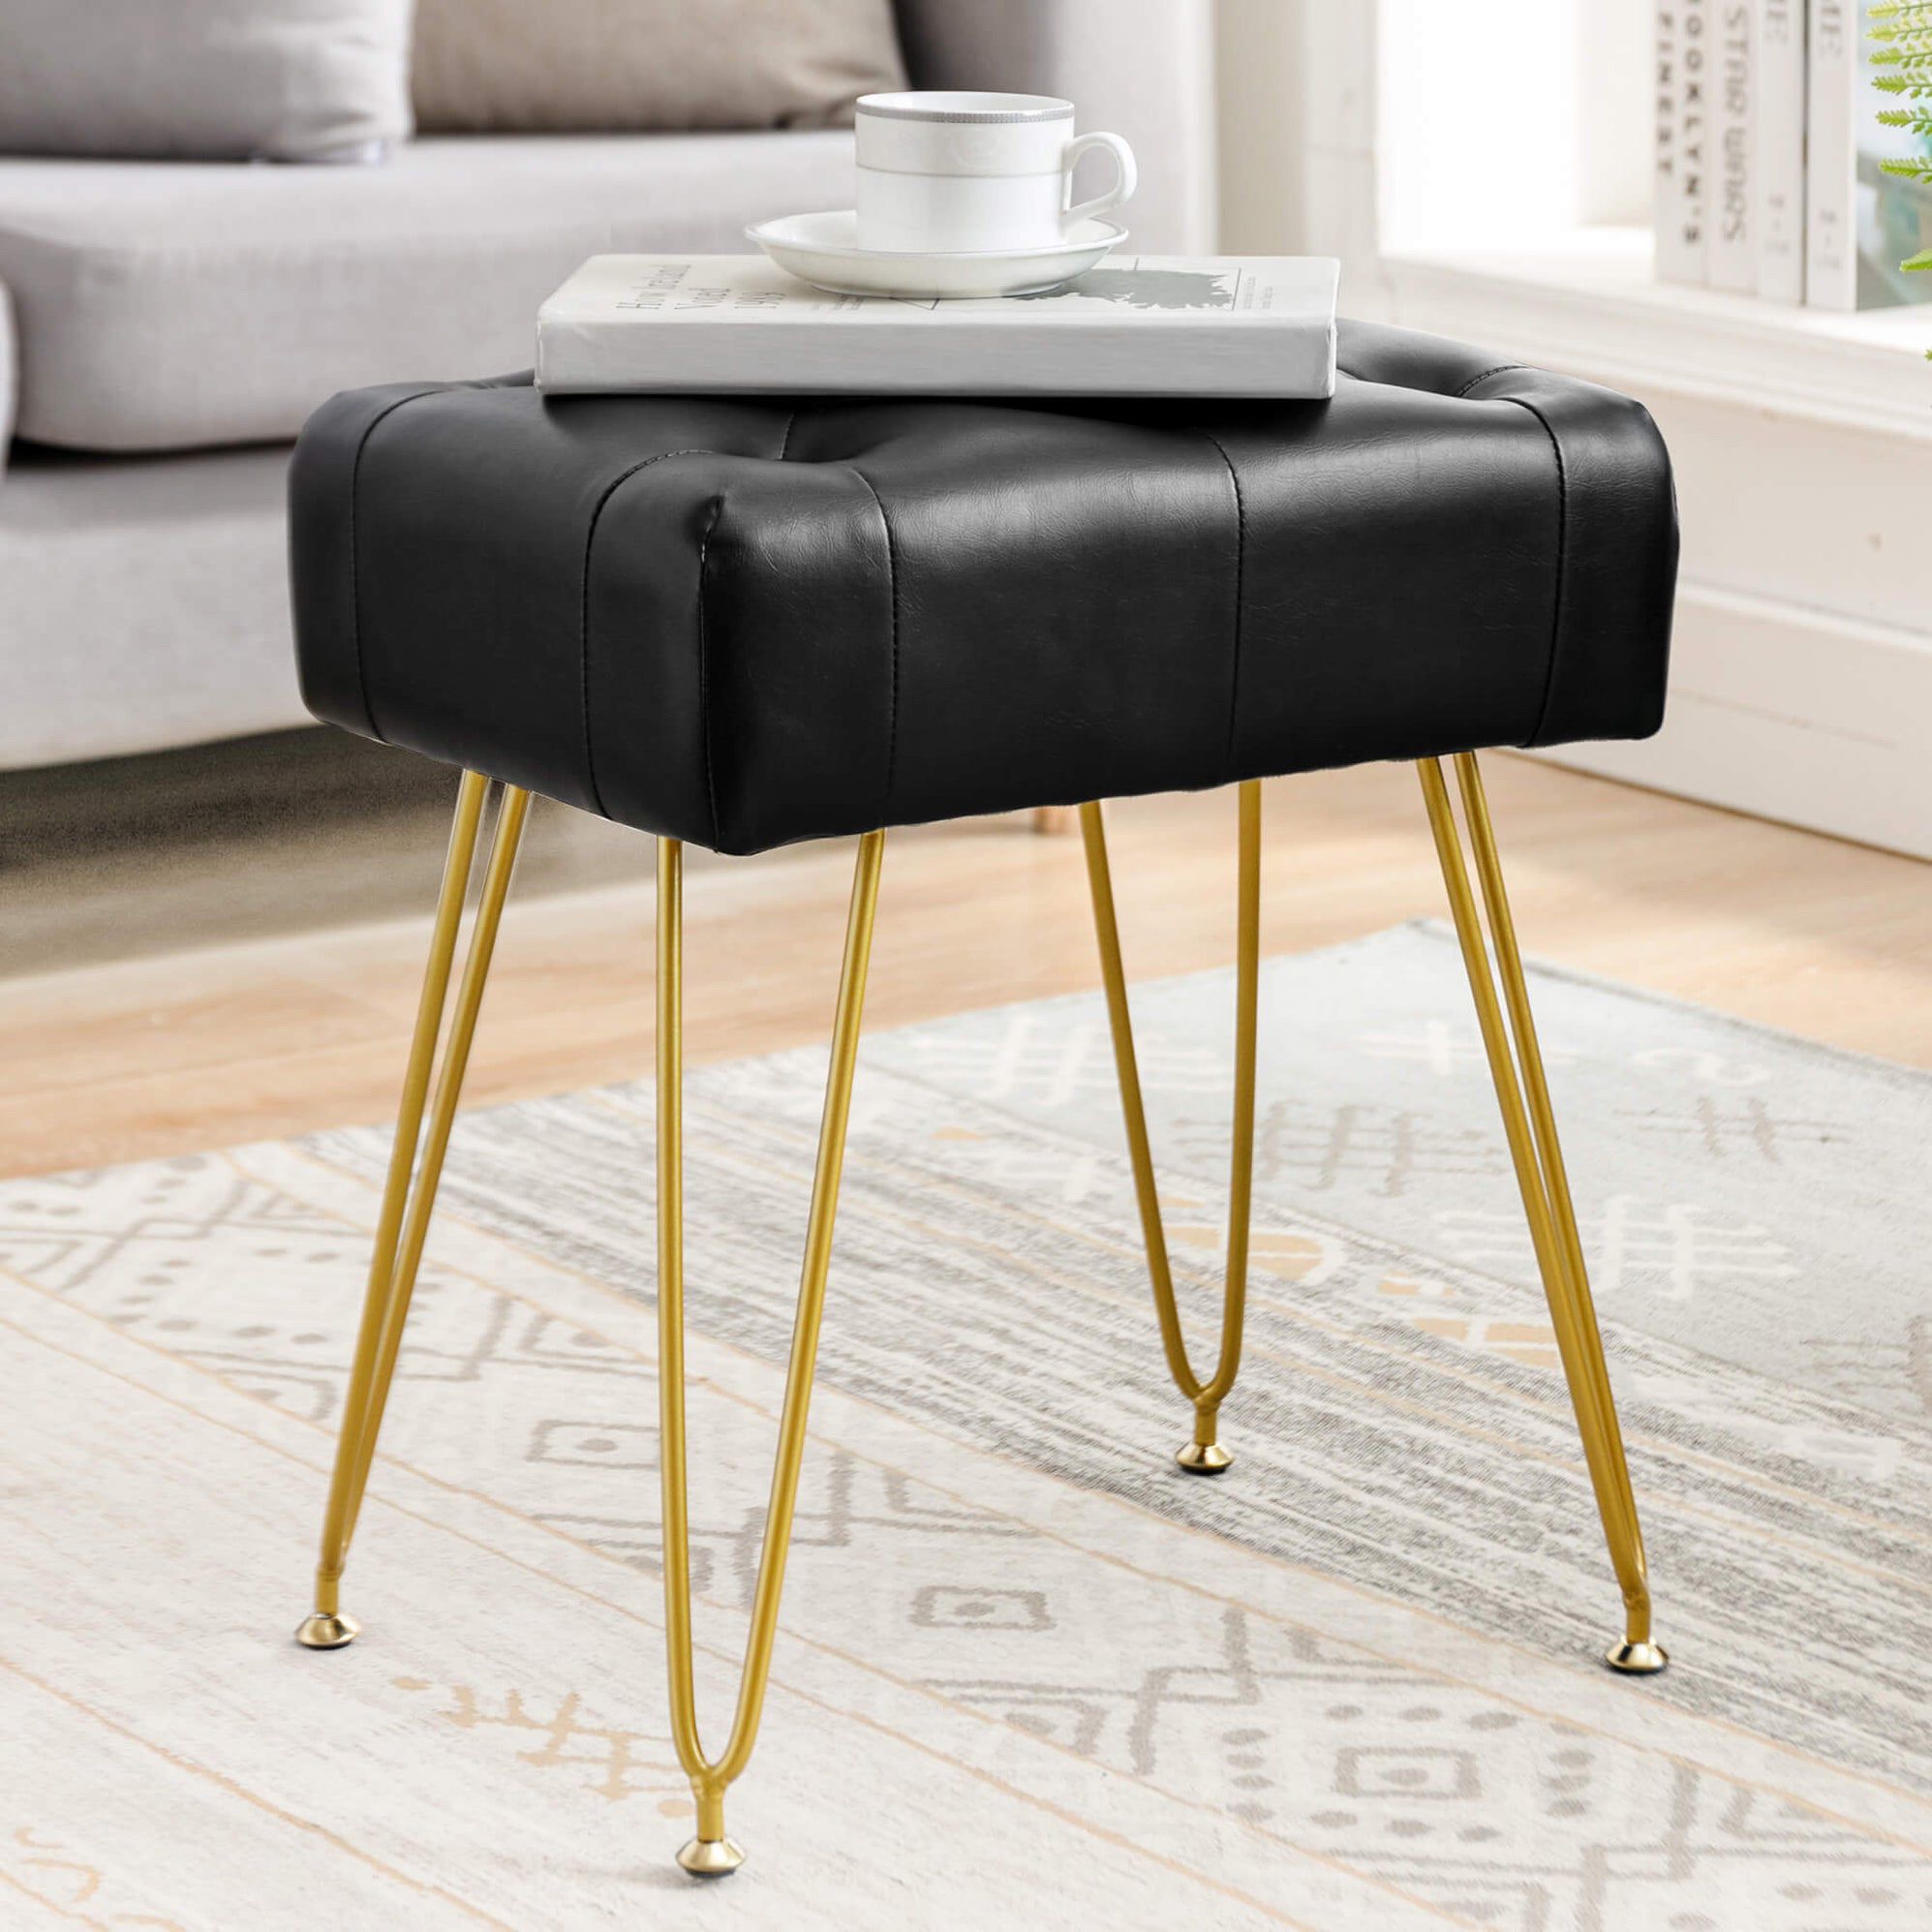 Faux Leather Rectangle Vanity Stool, Modern Vanity Chair for Makeup Room, Ottoman Foot Rest Entryway Bench for Bedroom Living Room